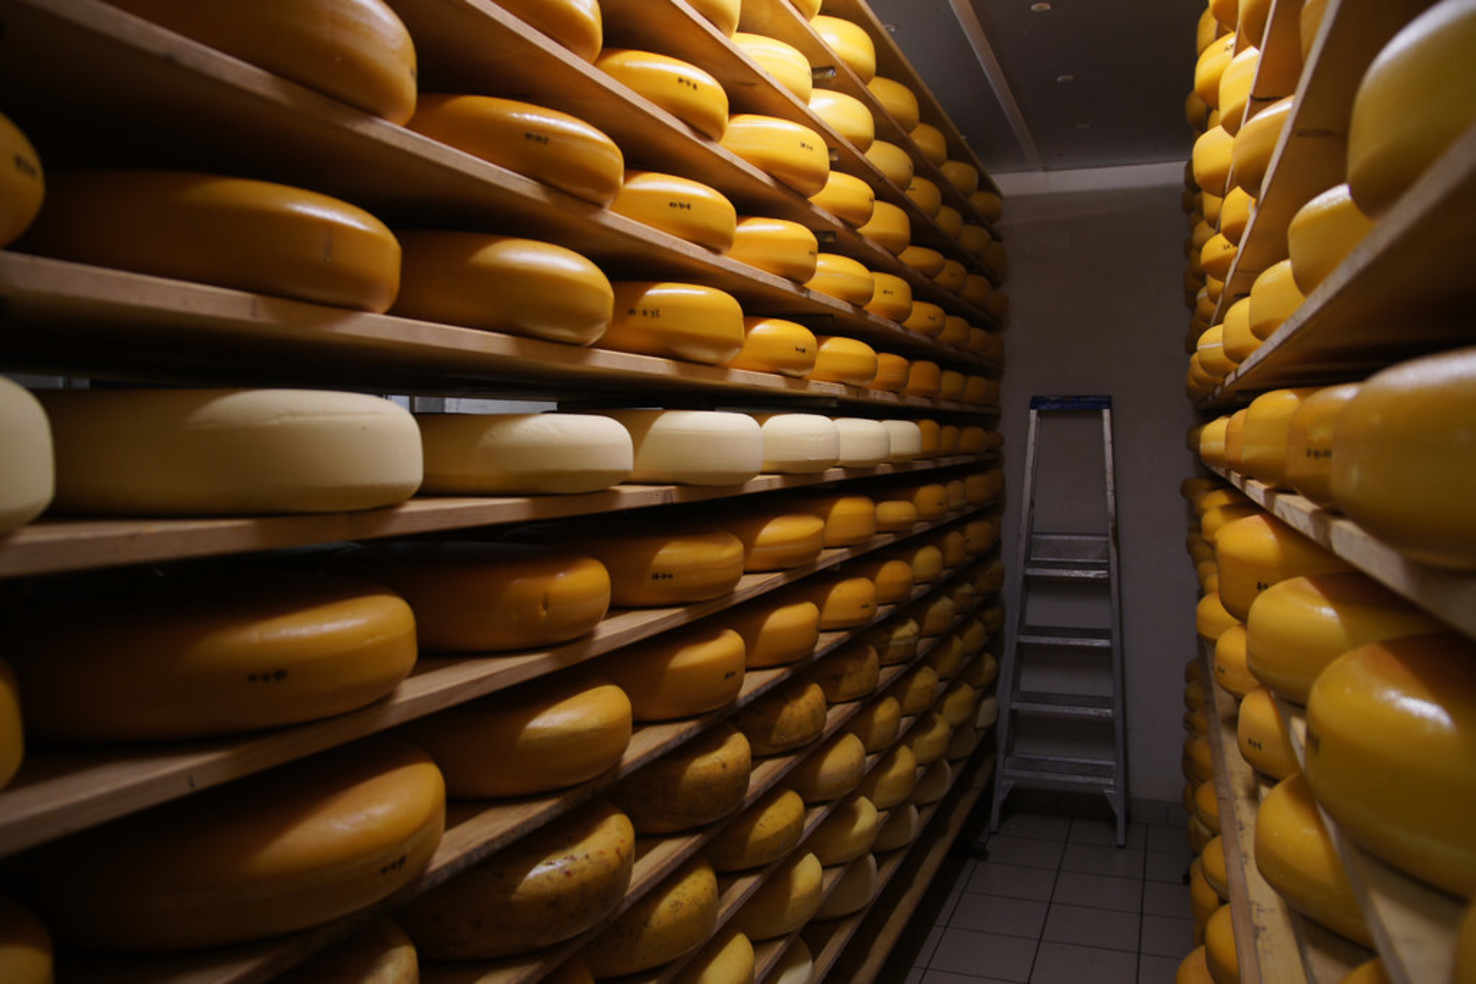 Large cheese